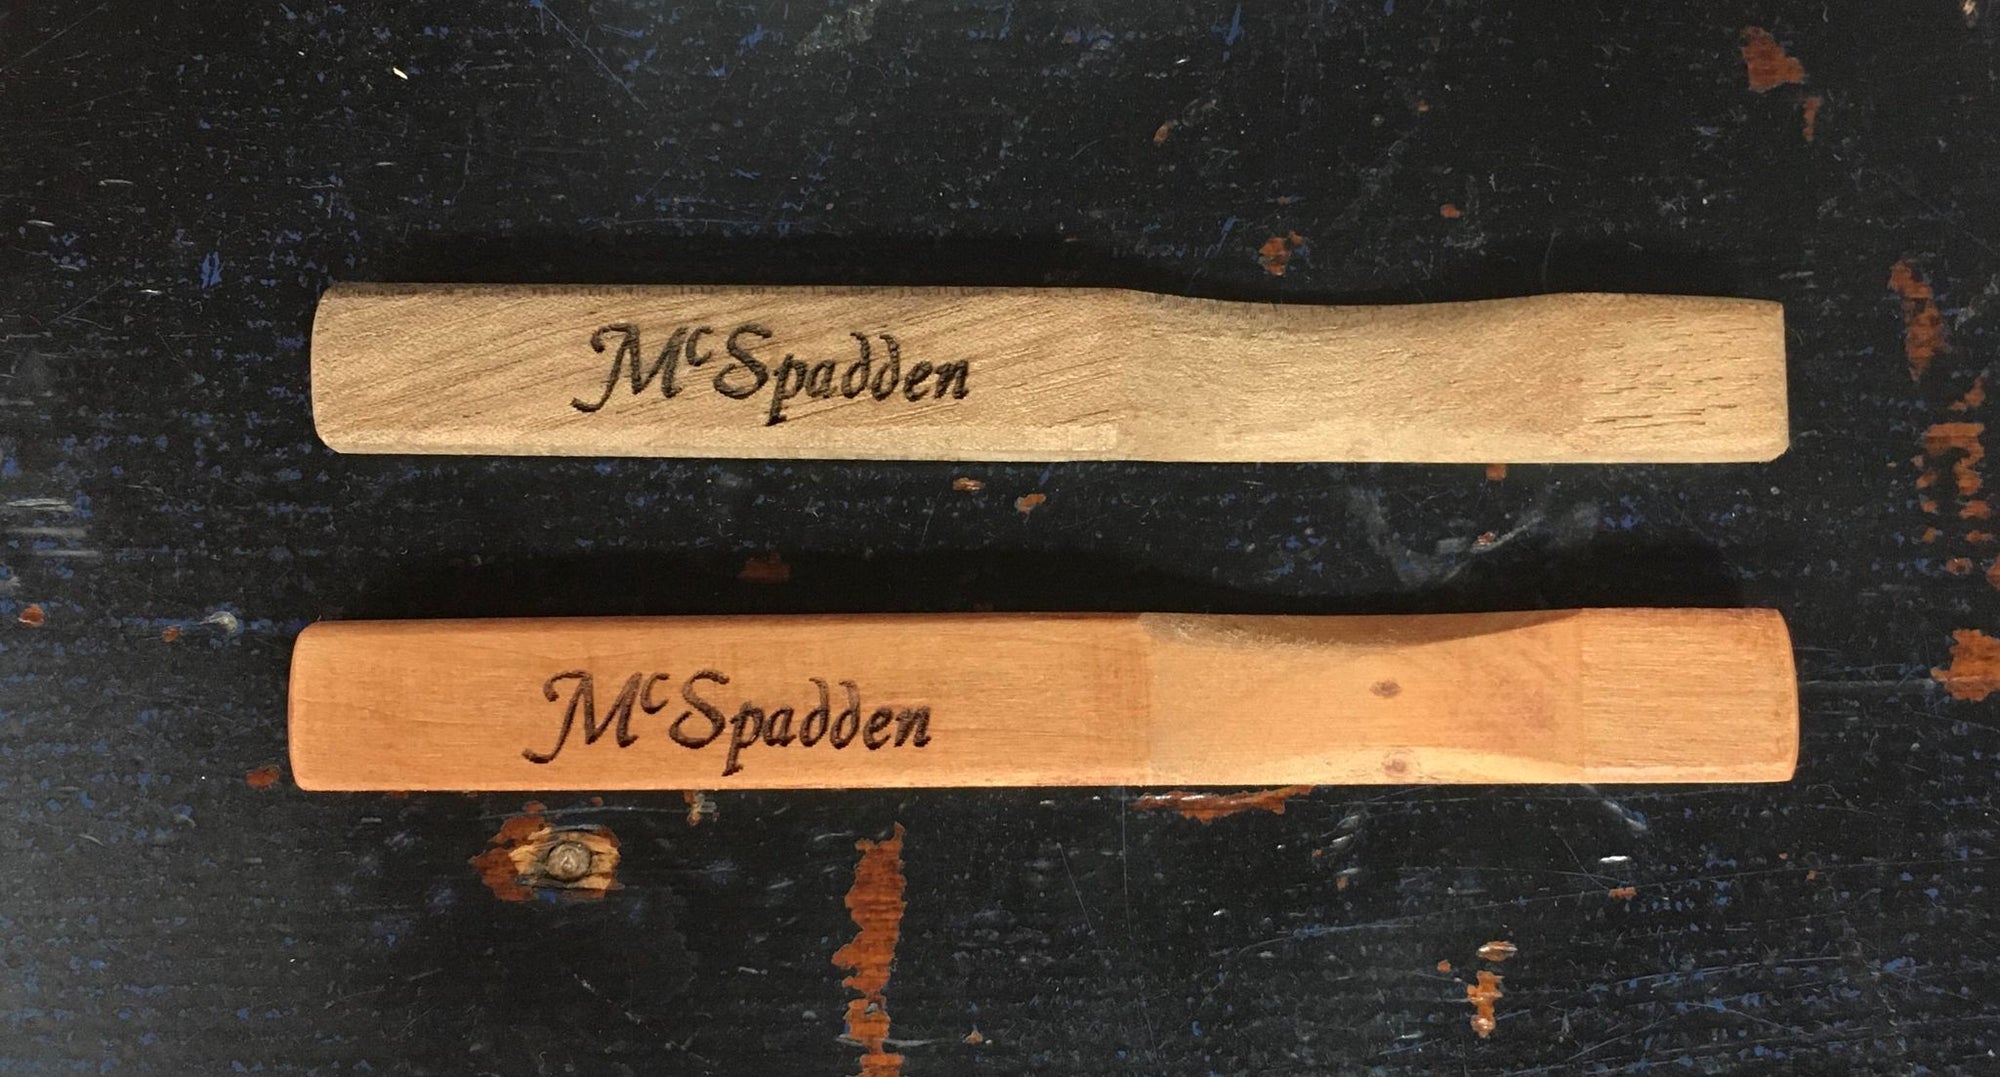 Two McSpadden Noters, one in walnut and one in ebony, engraved with the name Mr. Speelman.